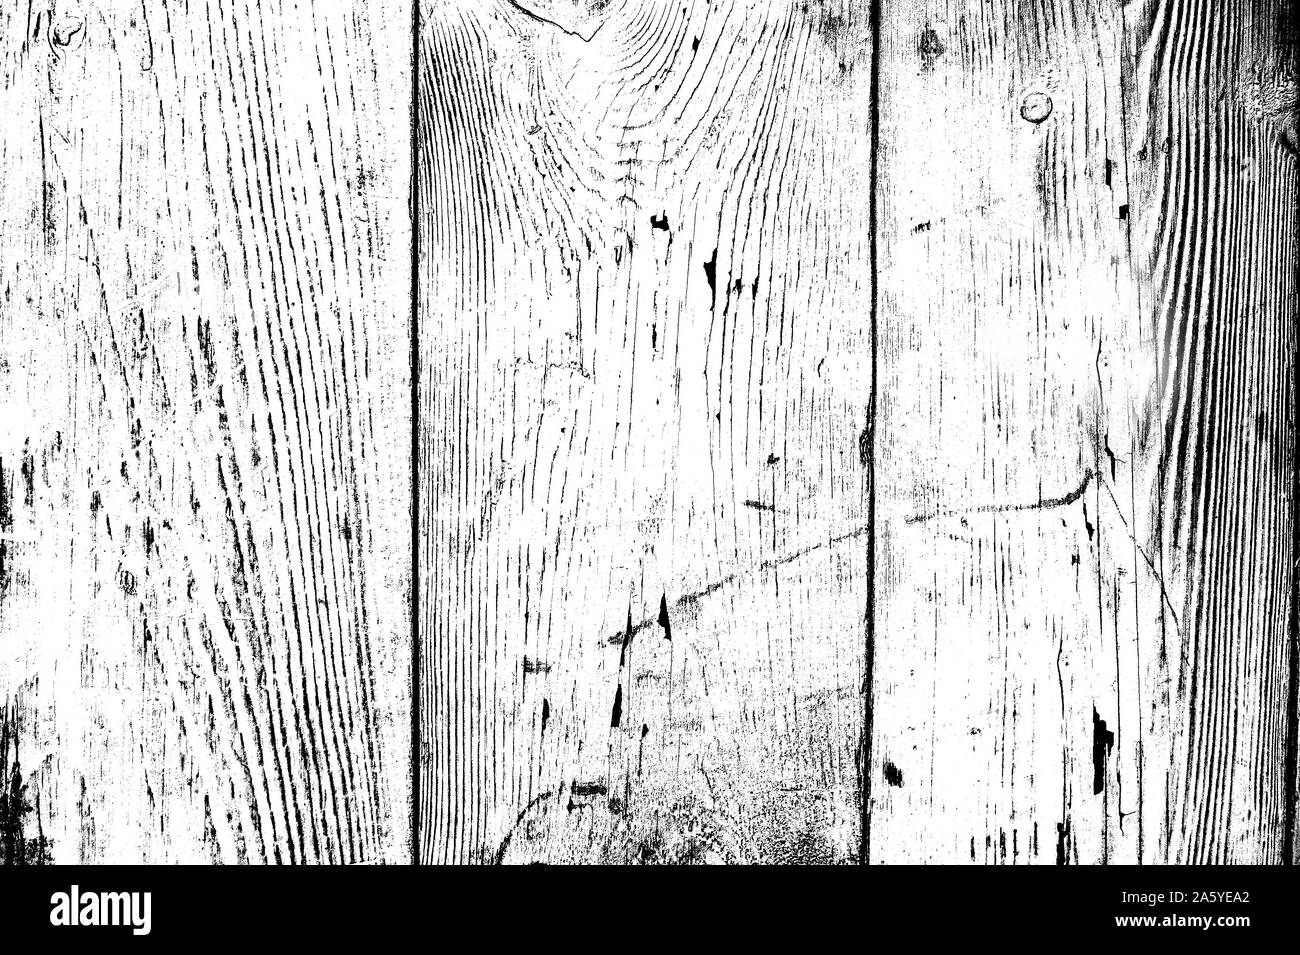 Photo of a wooden desk in grayscale. For use as a texture for your design. Stock Photo